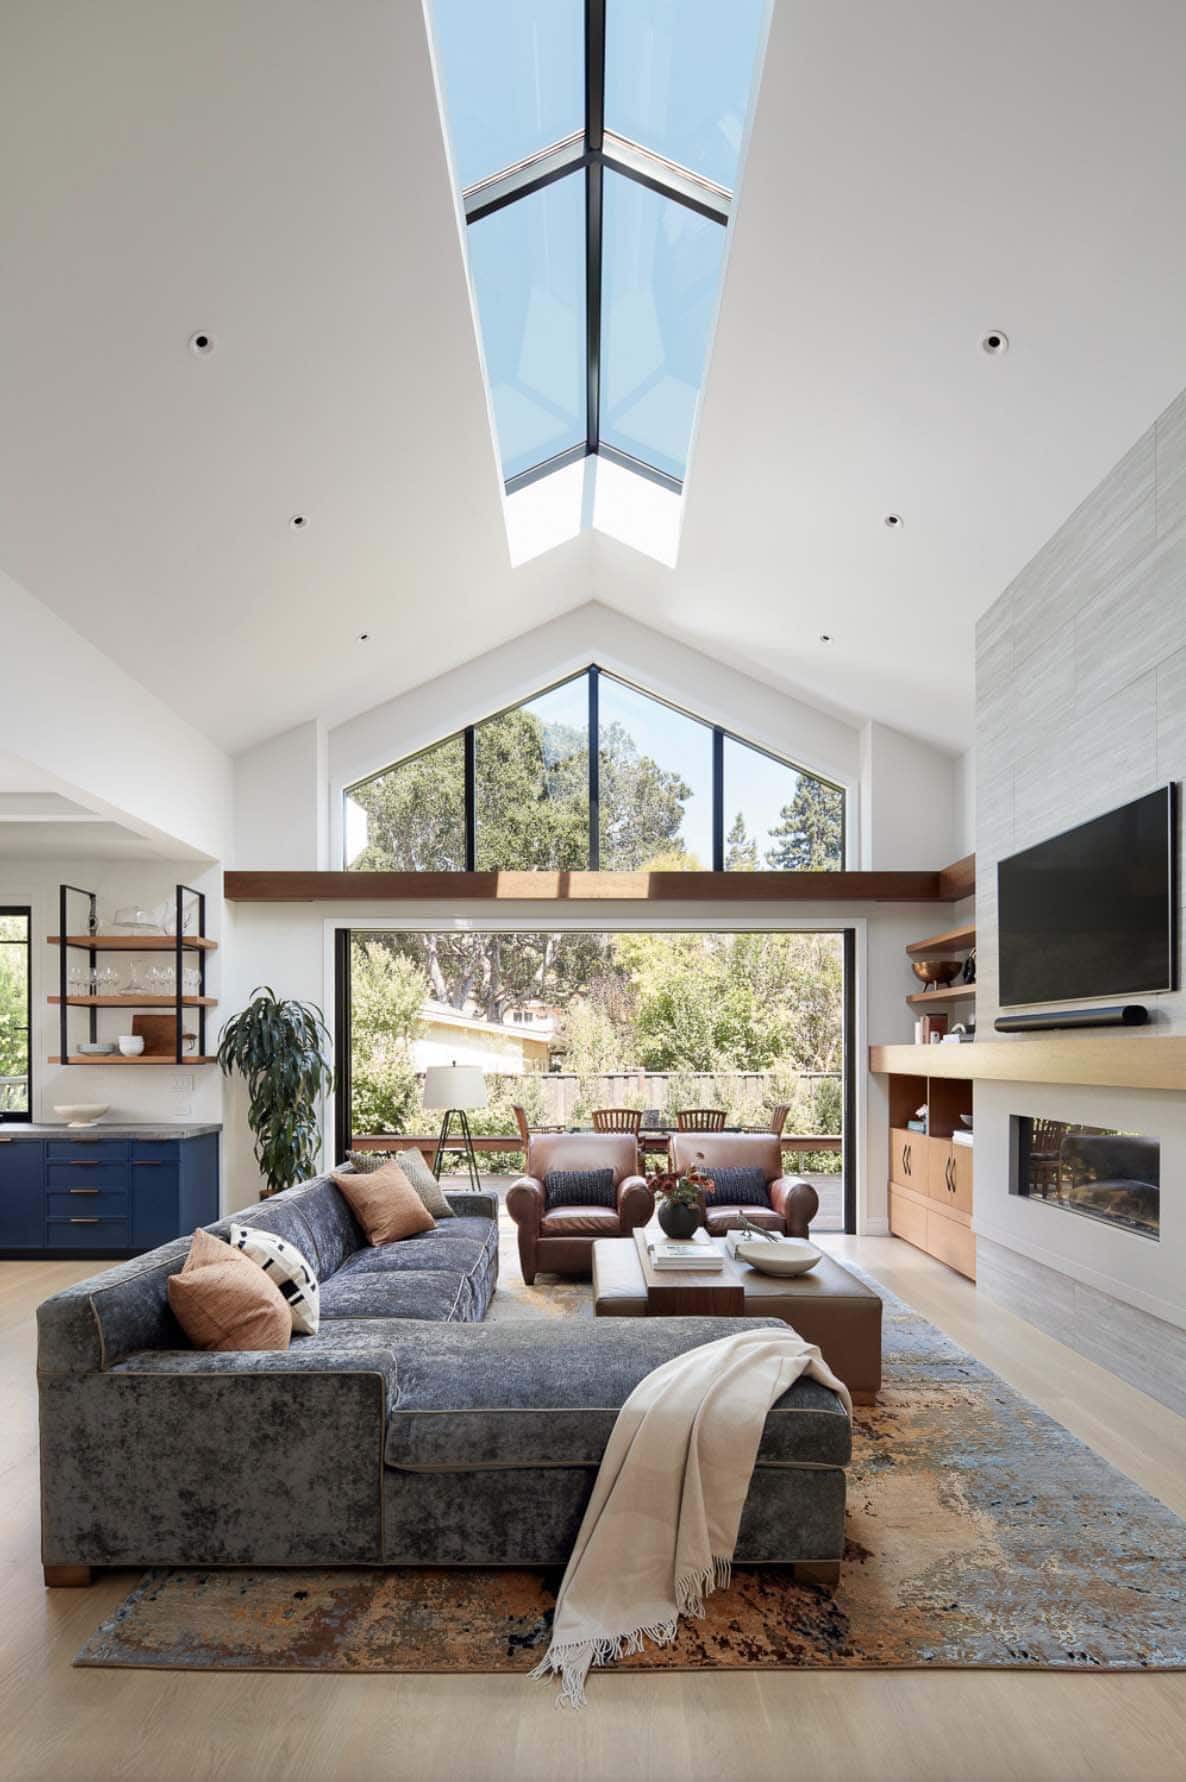 transitional style living room with a skylight